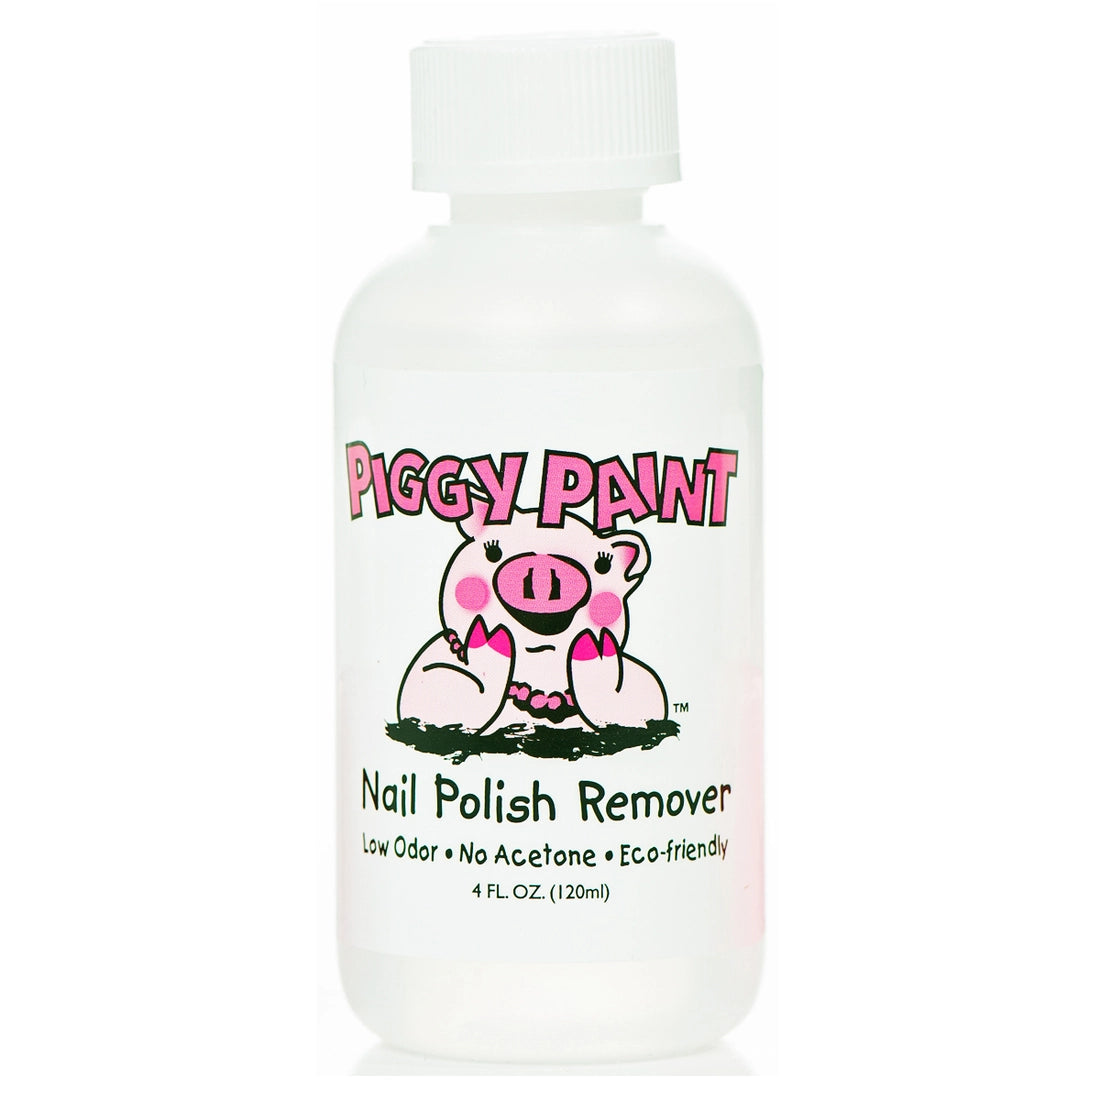 Piggy Paint Remover- Nail Polish Remover